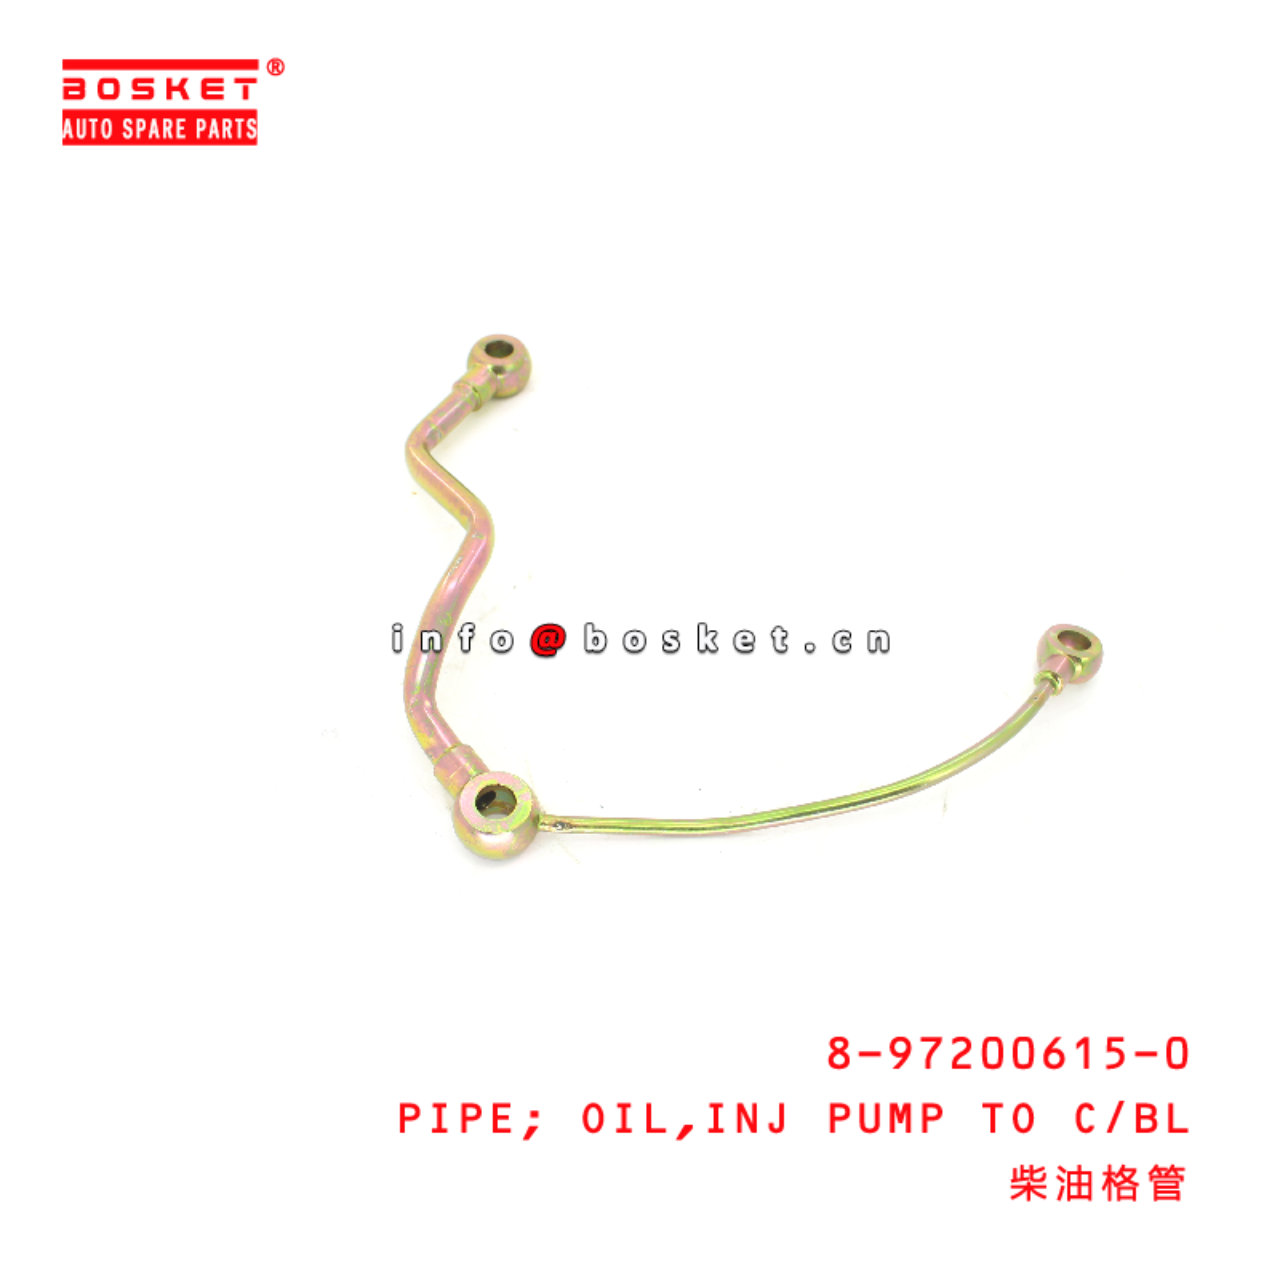 8-97200615-0 Injection Pump To Cylinder Block Oil Pipe suitable for ISUZU 4HG1 8972006150